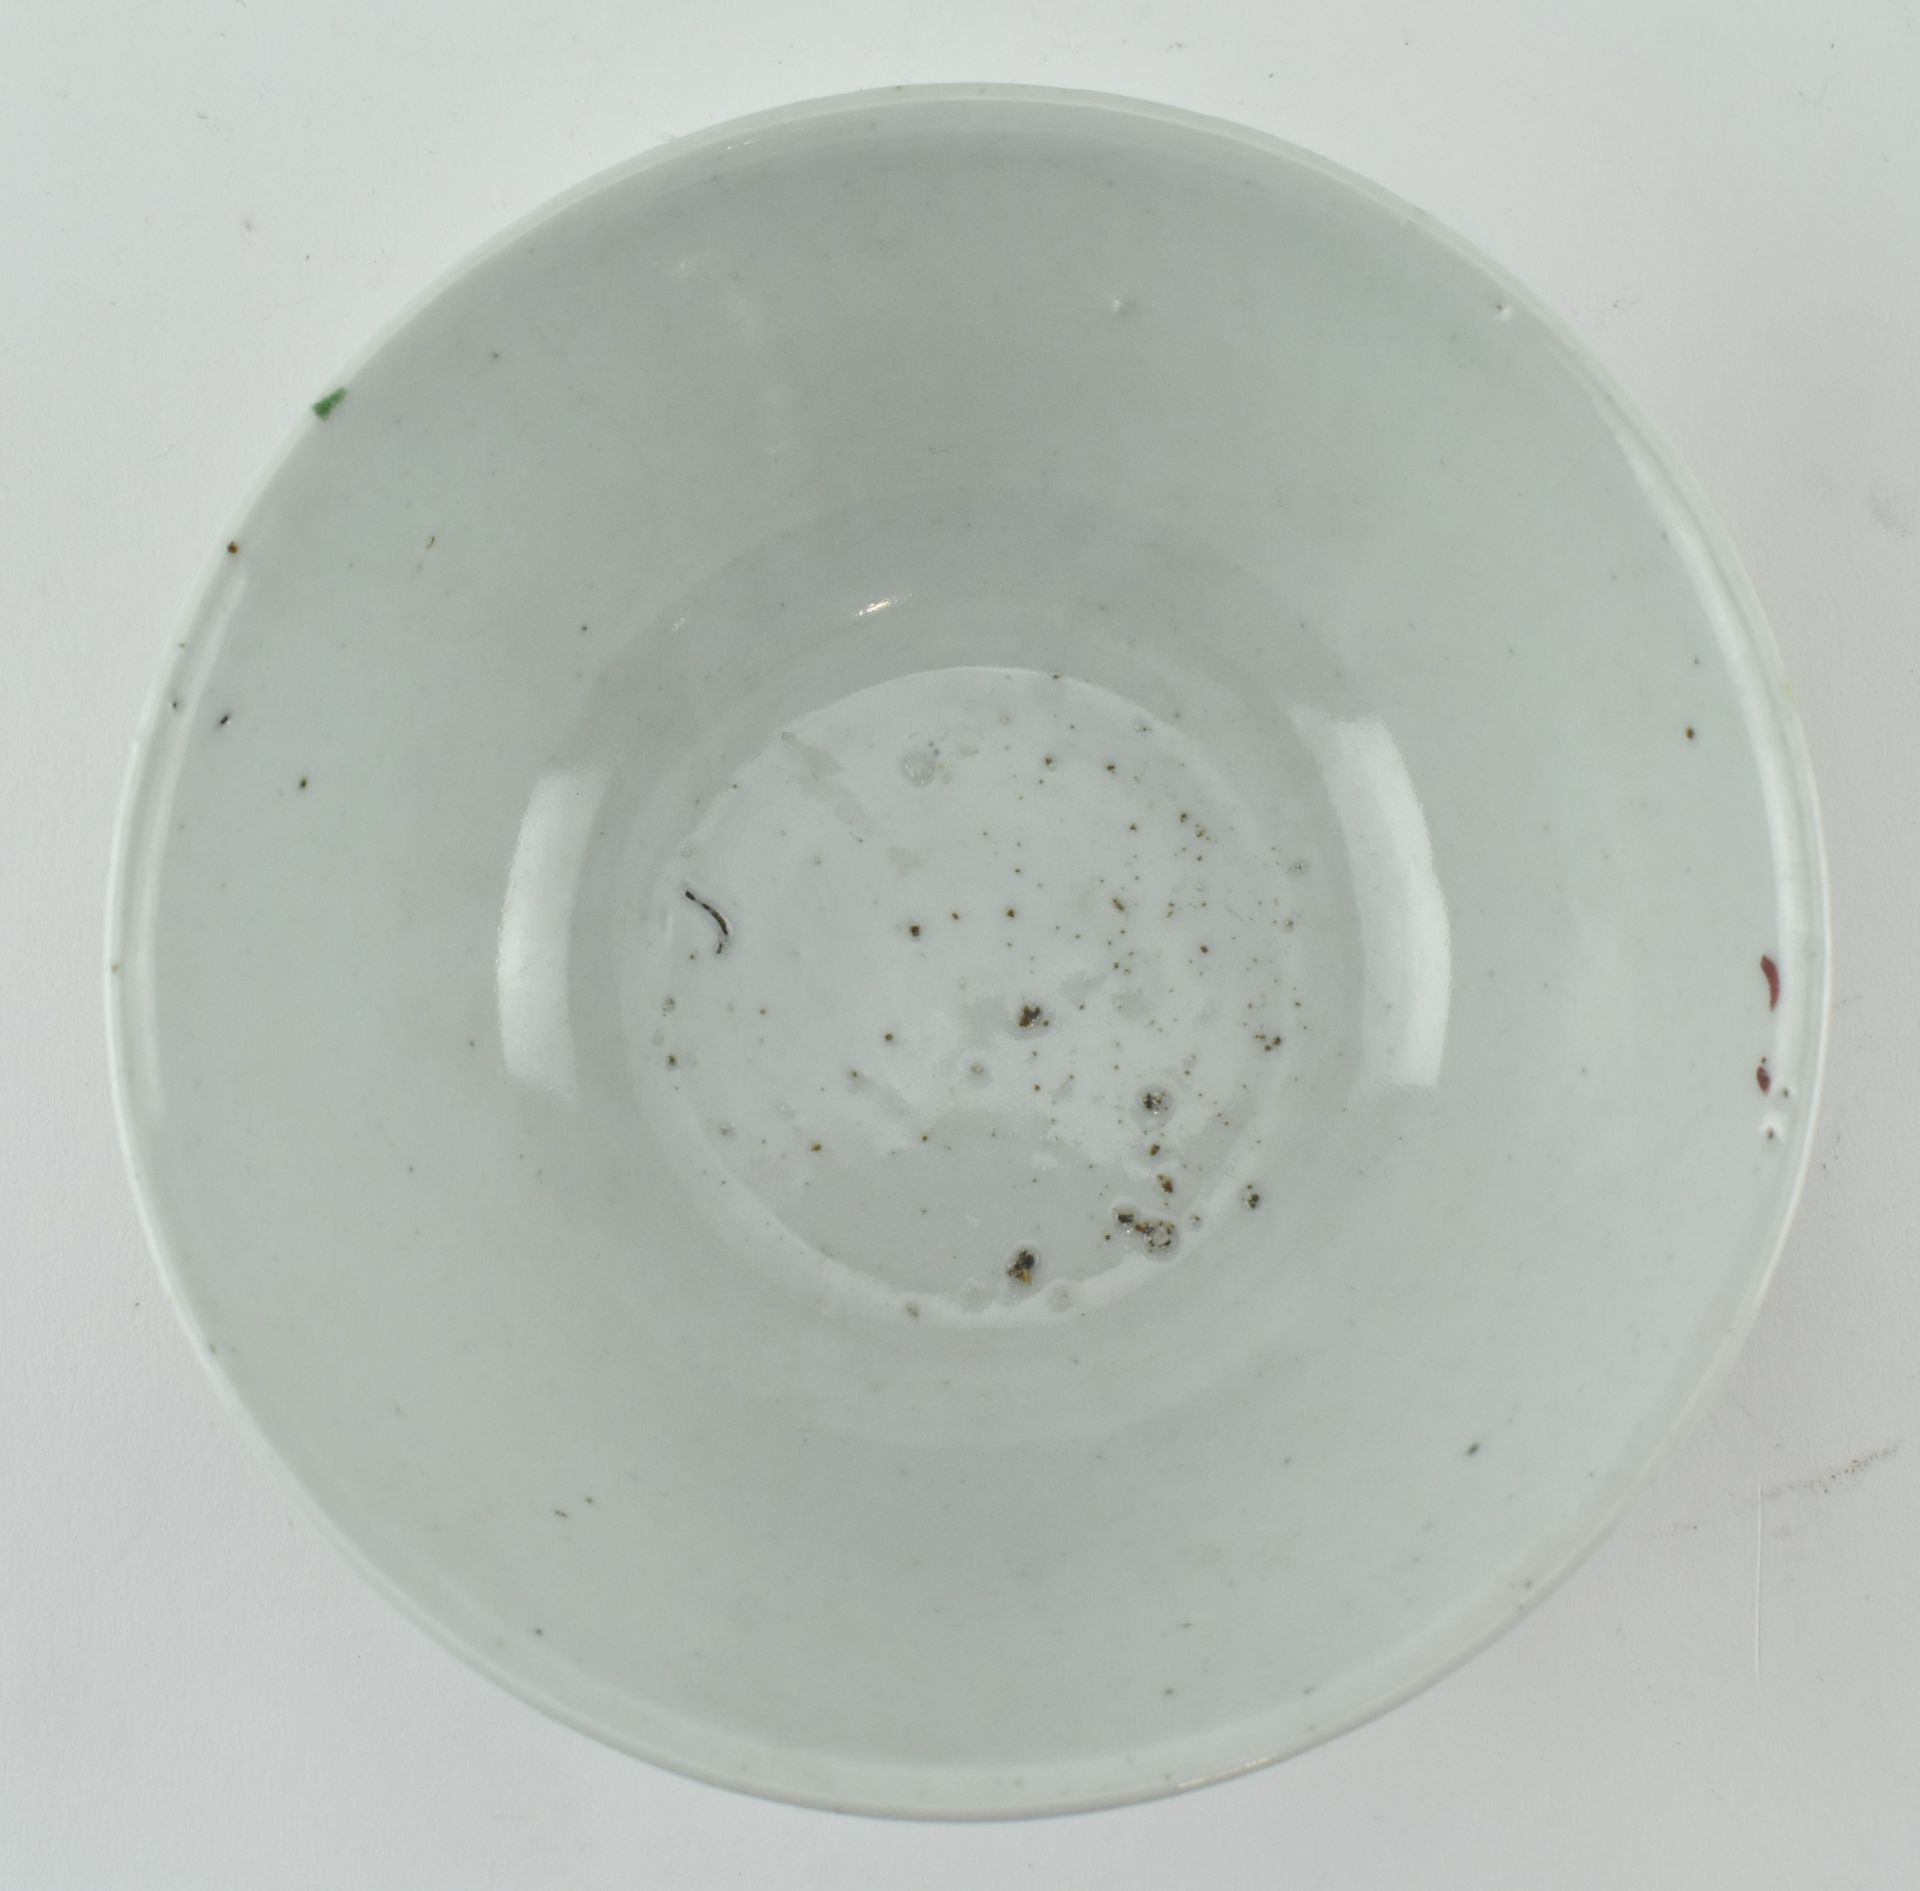 MING OR LATER TRI-COLOURED BOWL 明 红黄绿彩绘碗 - Image 4 of 6